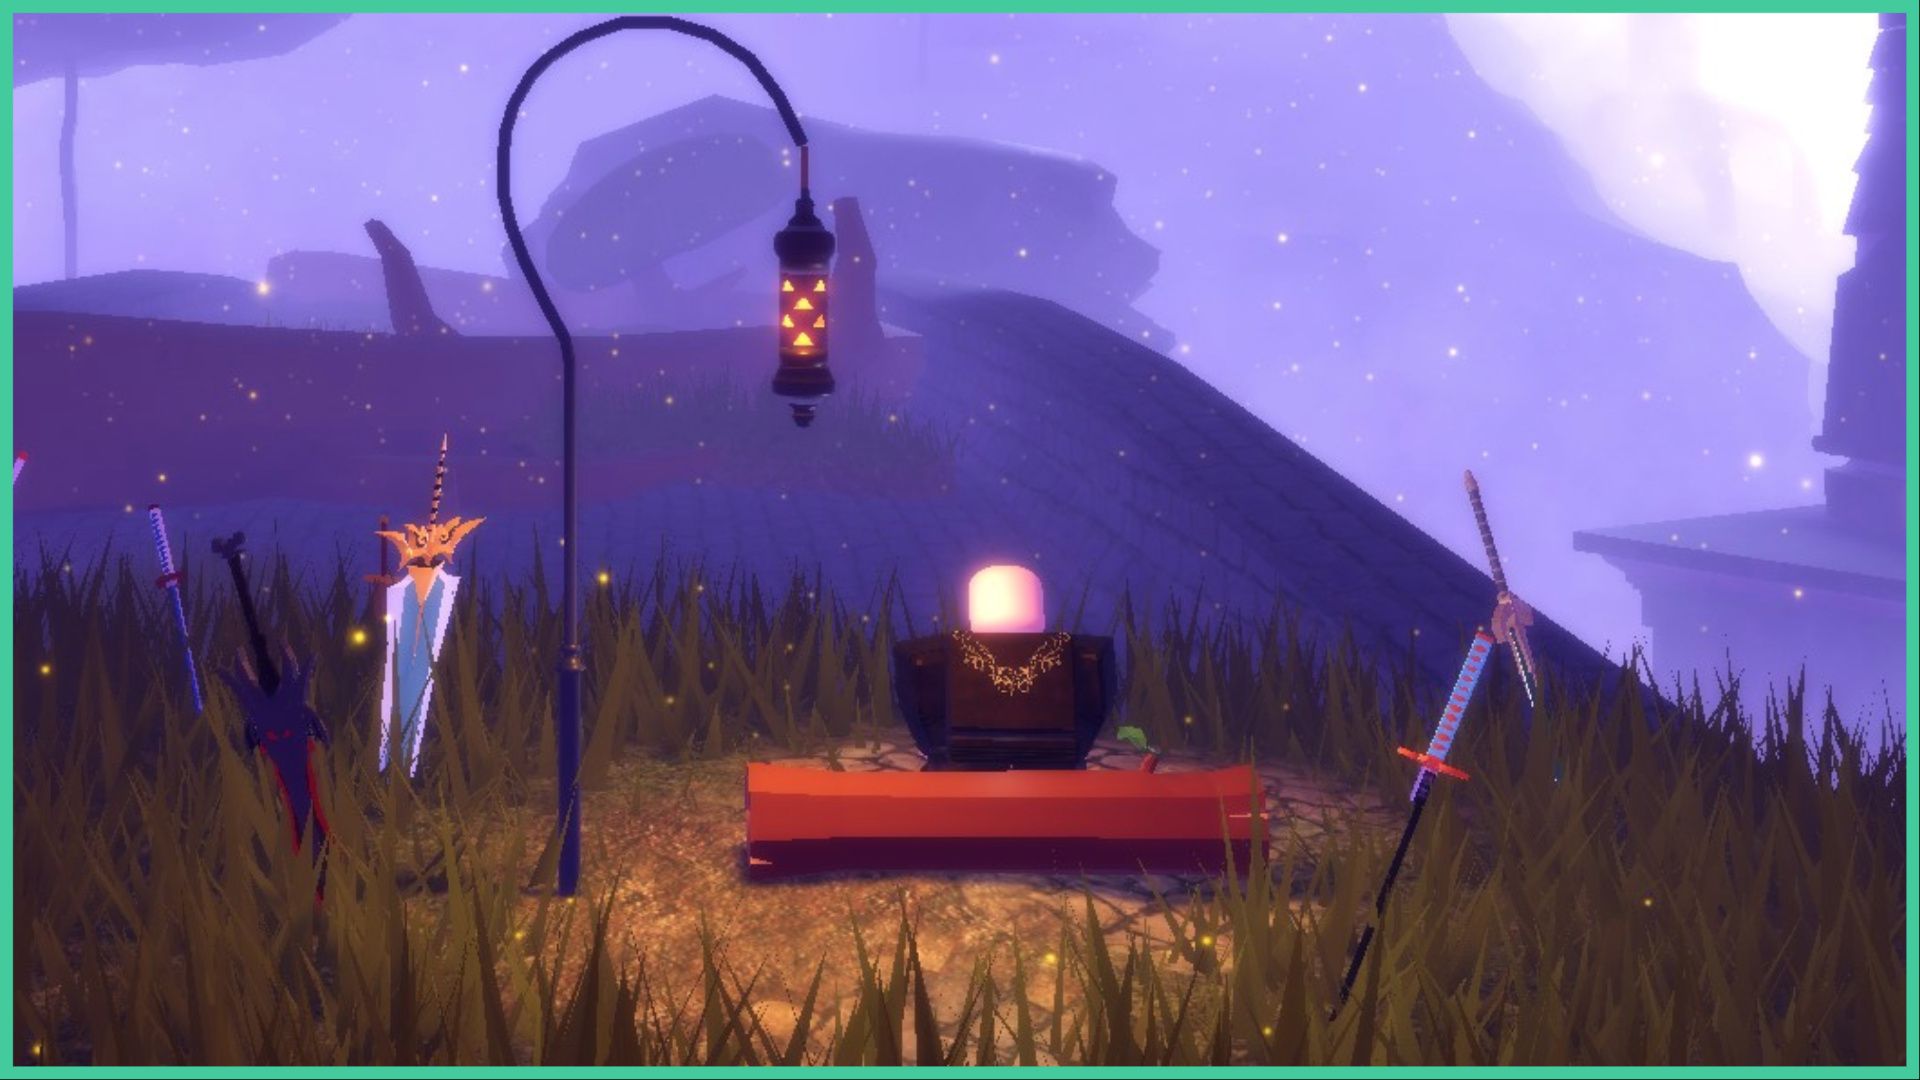 feature image for our legends rewritten blessings guide, the image features a screenshot of a roblox character sitting on a wooden log bench surrounded by grass, as they look out over the snowy surroundings that are covered in mist, they have a lamp next to them to light up the space, as well as multiple swords that are stabbed into the ground